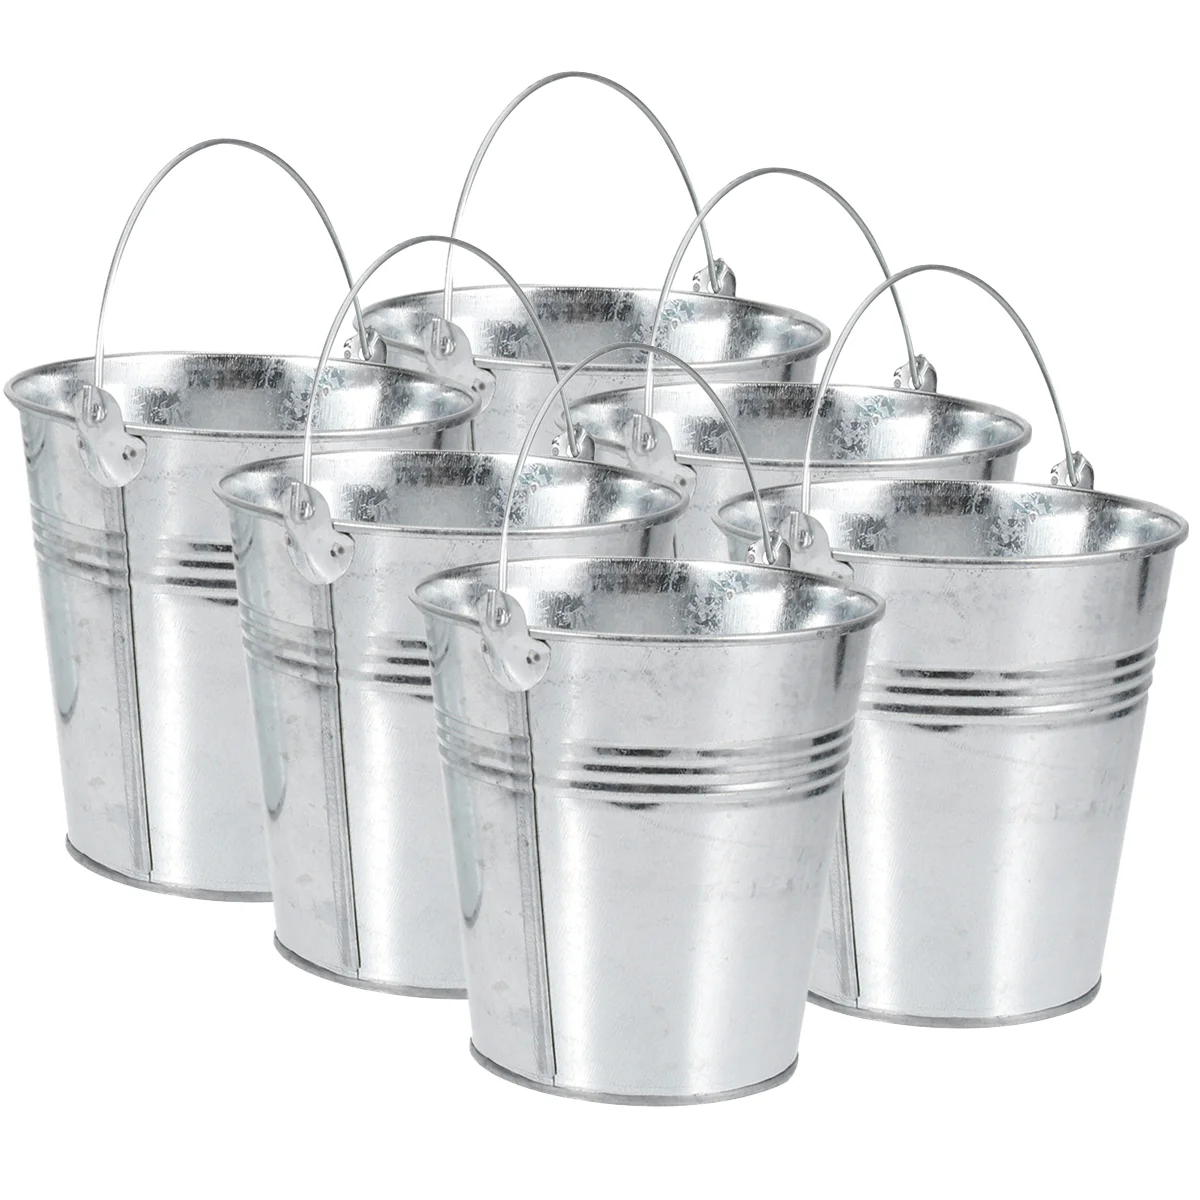 

Bucket Buckets Mini Metal Pail Tin Pails Small French Tinplate Serving For Fries Food Barrel Galvanized Party Pot Wedding